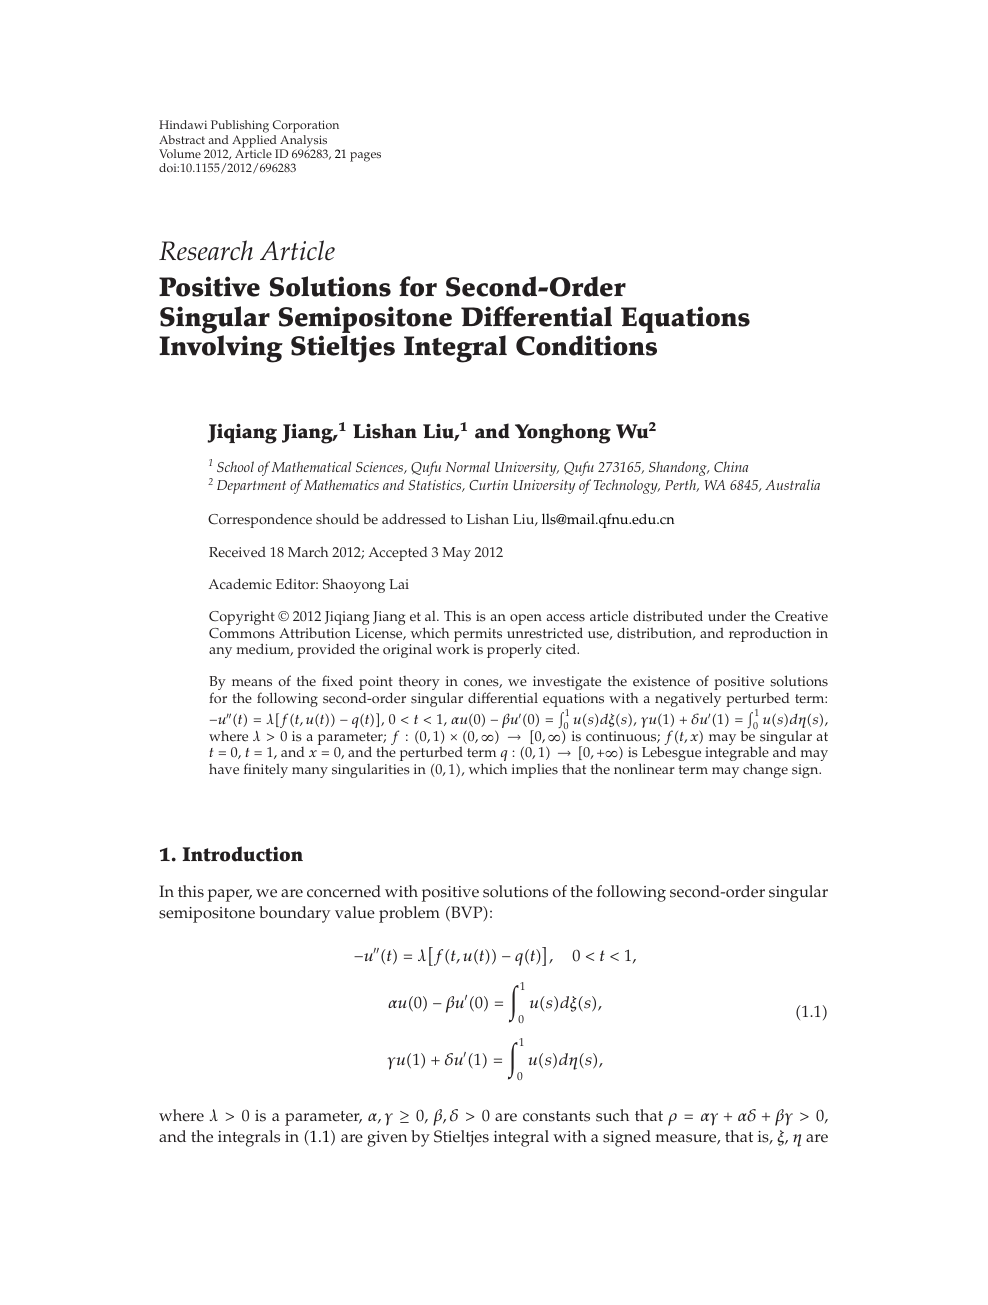 Positive Solutions For Second Order Singular Semipositone Differential Equations Involving Stieltjes Integral Conditions Topic Of Research Paper In Mathematics Download Scholarly Article Pdf And Read For Free On Cyberleninka Open Science Hub